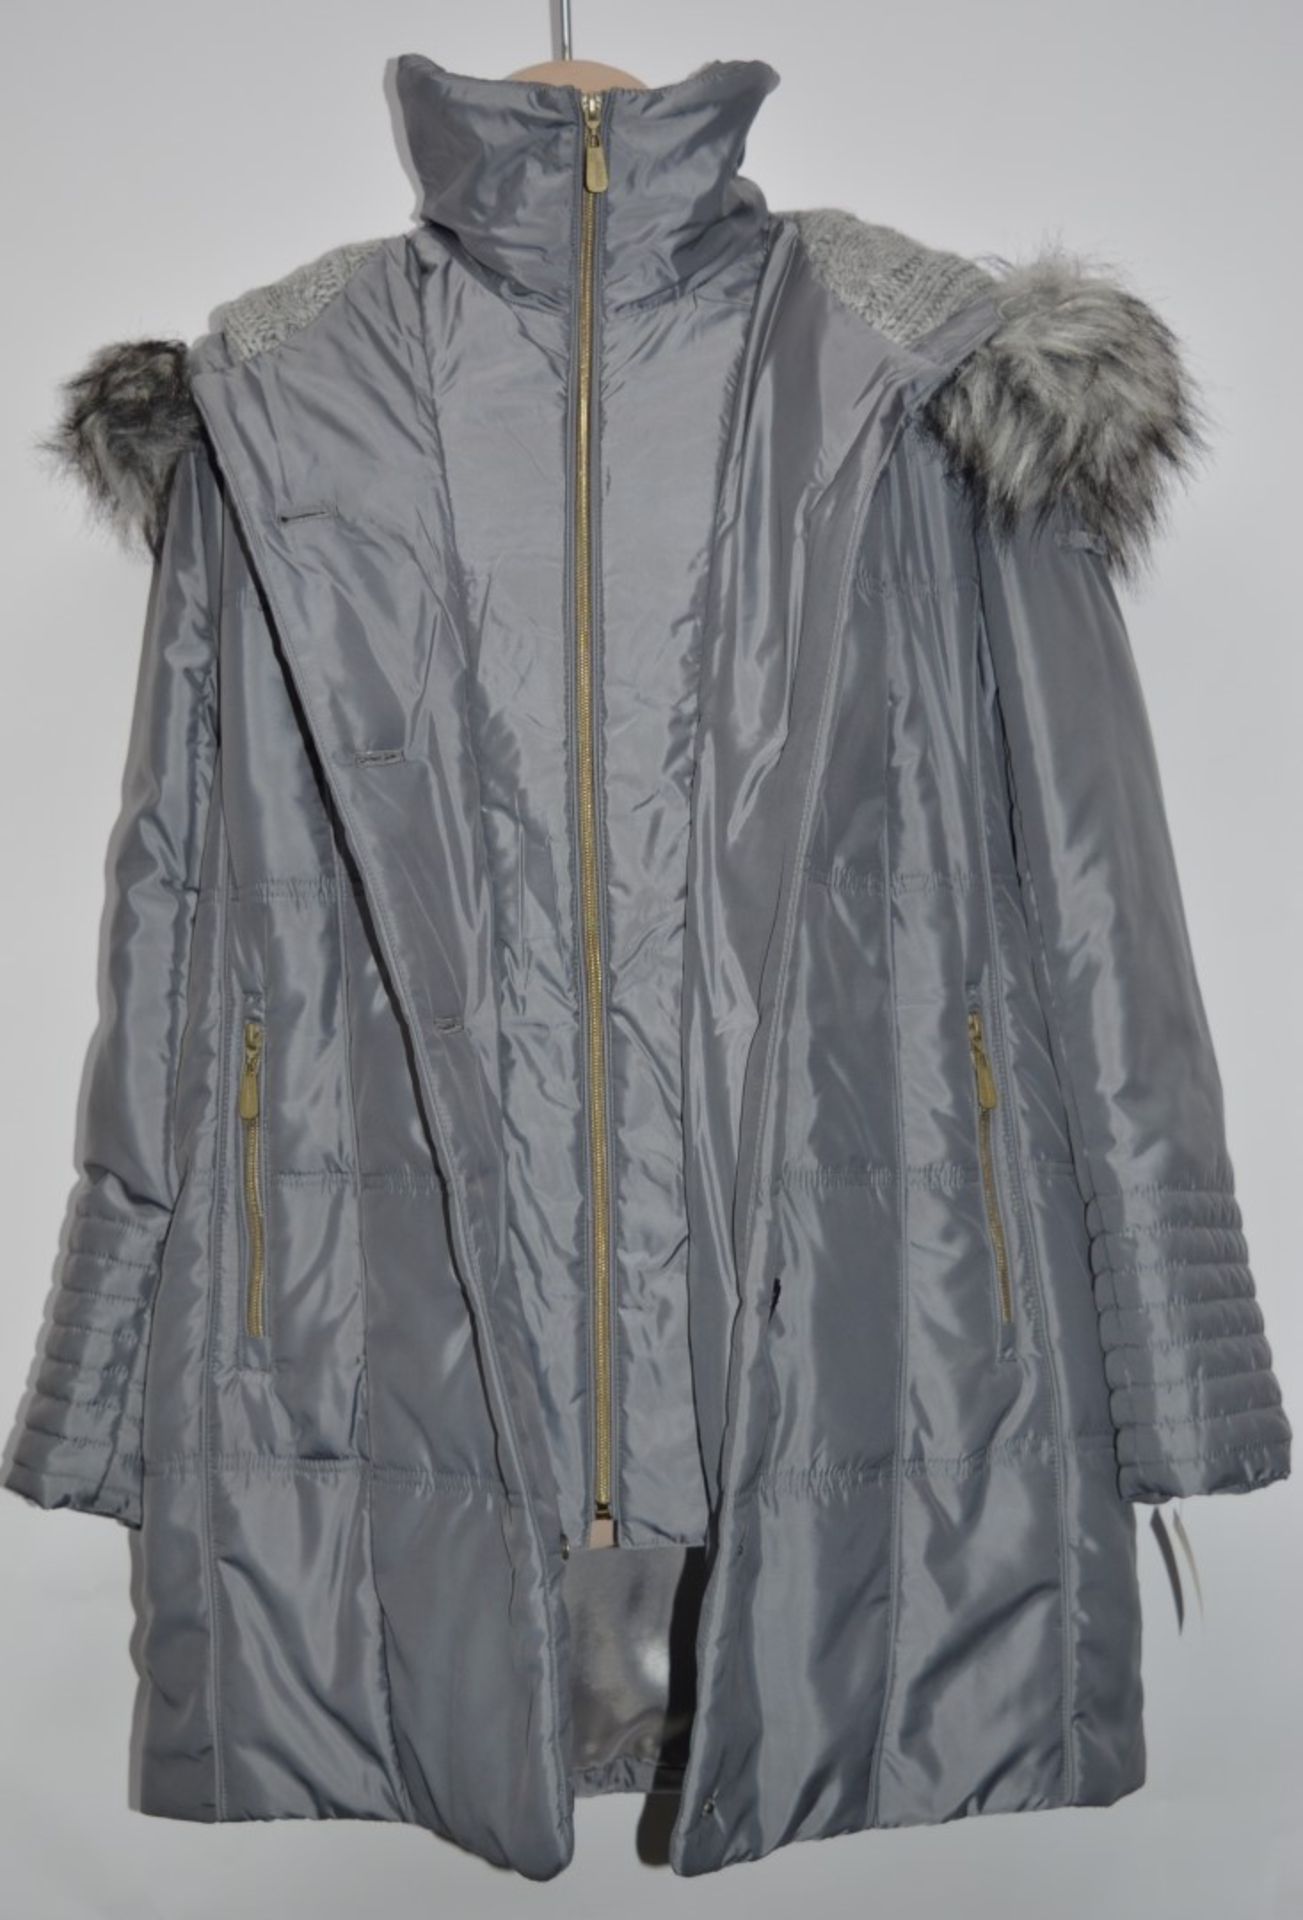 1 x Steilmann Kirsten Cover Womens Coat - Real Down Feather Filled Coat With Functional Pockets, - Image 3 of 13